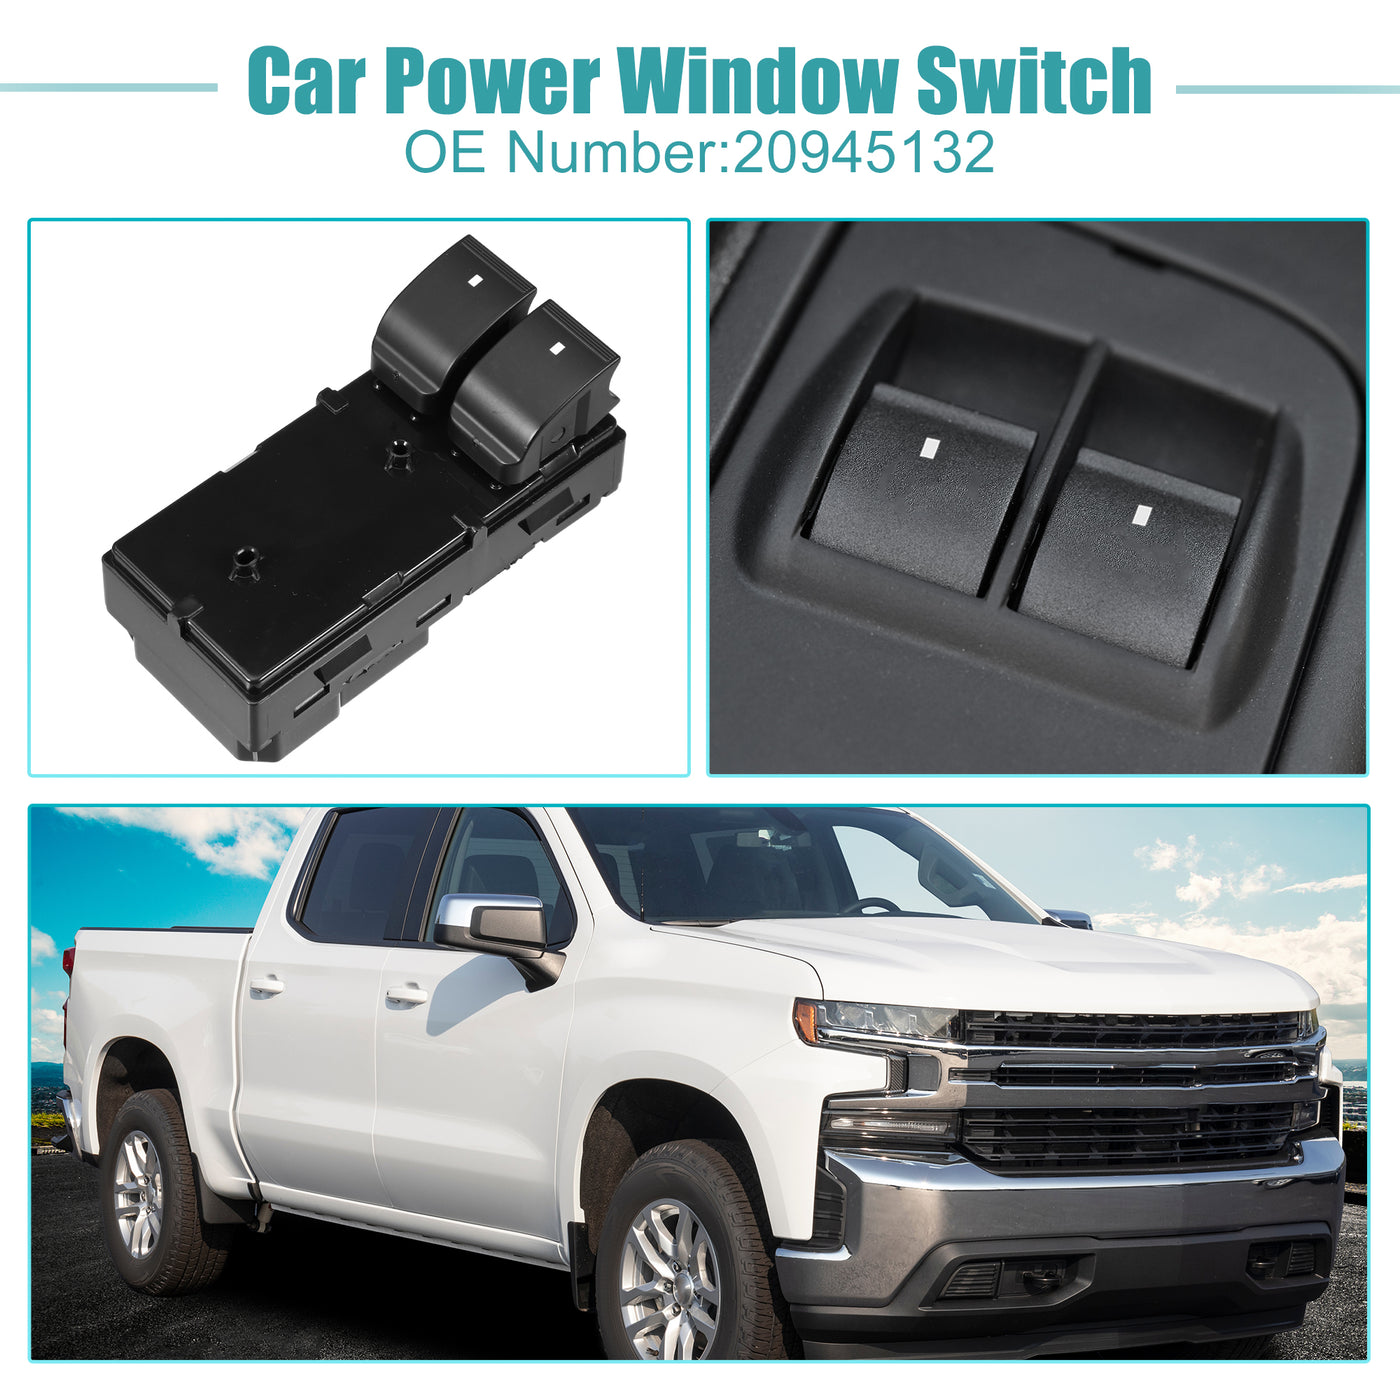 ACROPIX Power Window Switch Window Control Switch Fit for Chevrolet HHR for GMC Sierra 1500 No.20945132 - Pack of 1